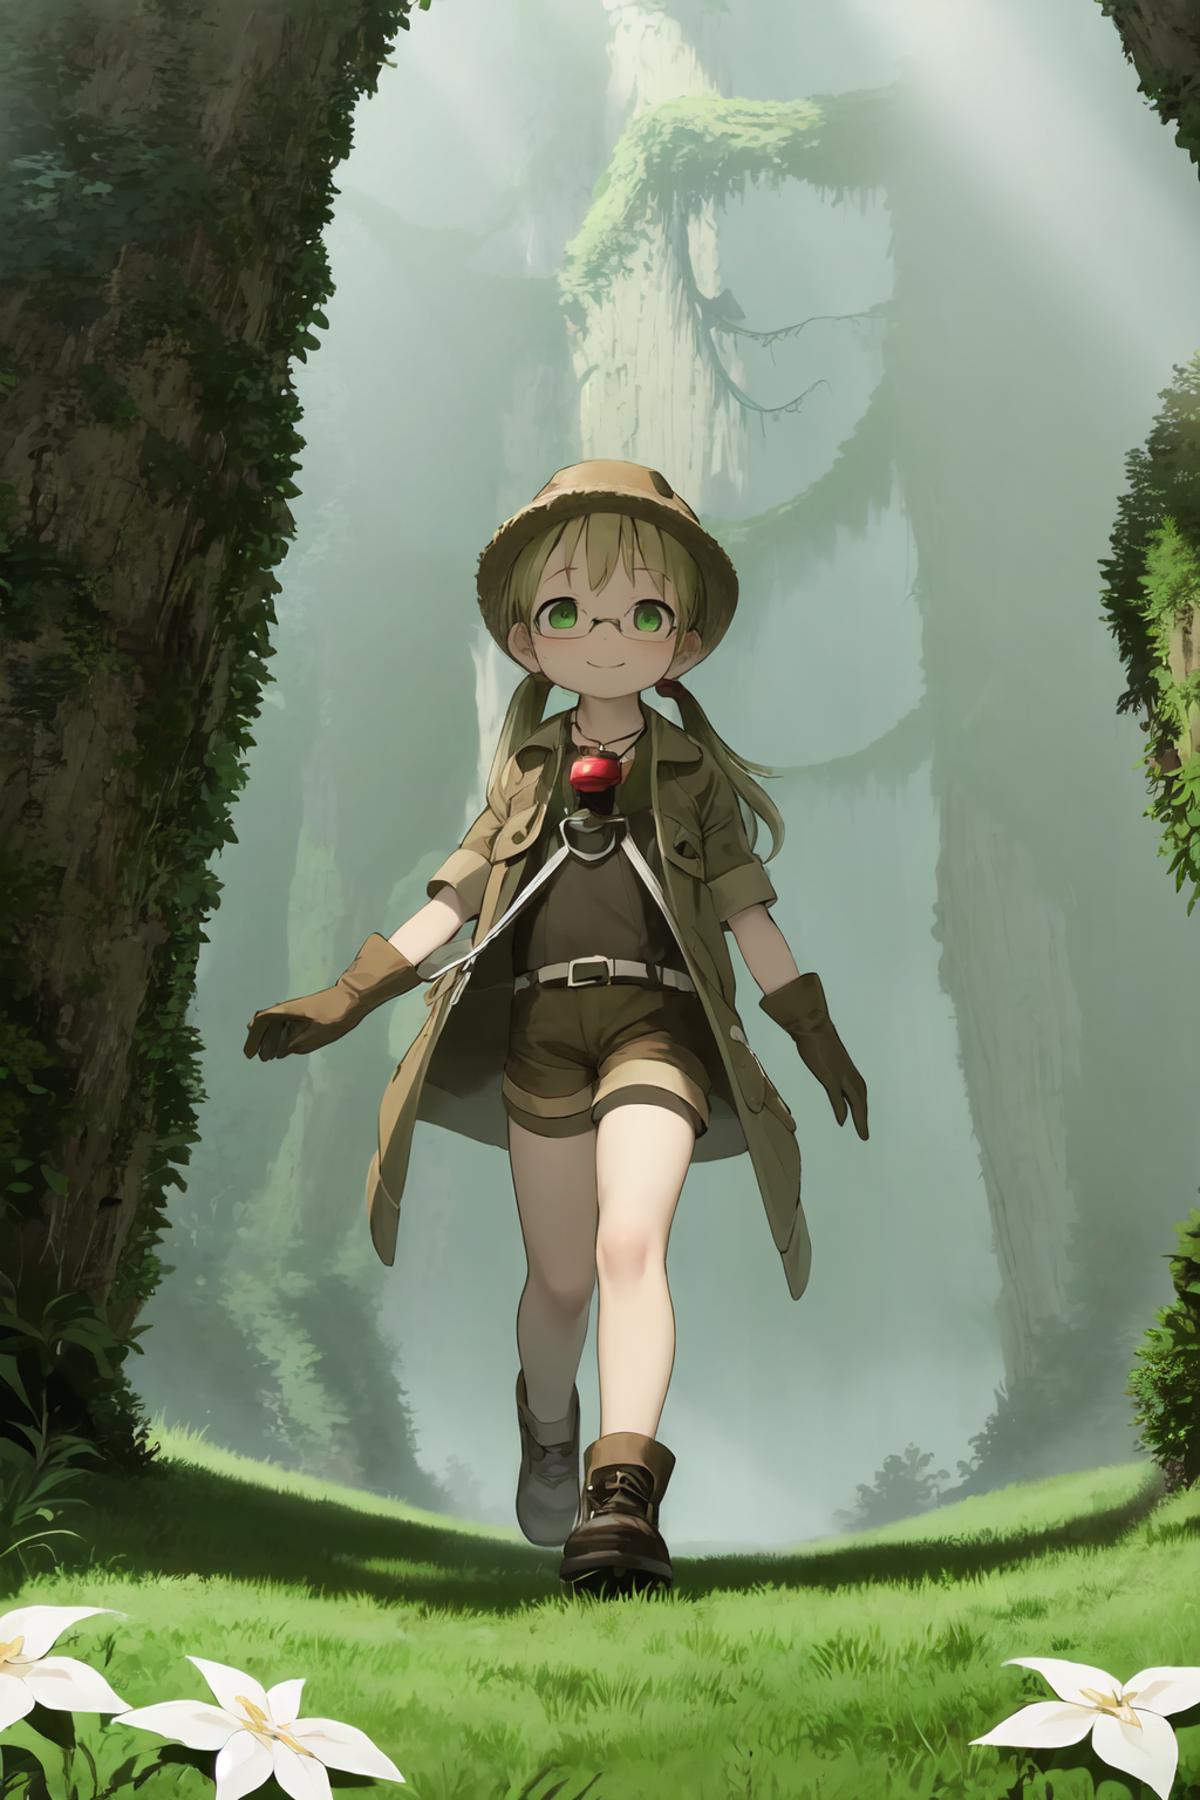 Made in Abyss | anime style | 深渊风格 image by Sammian